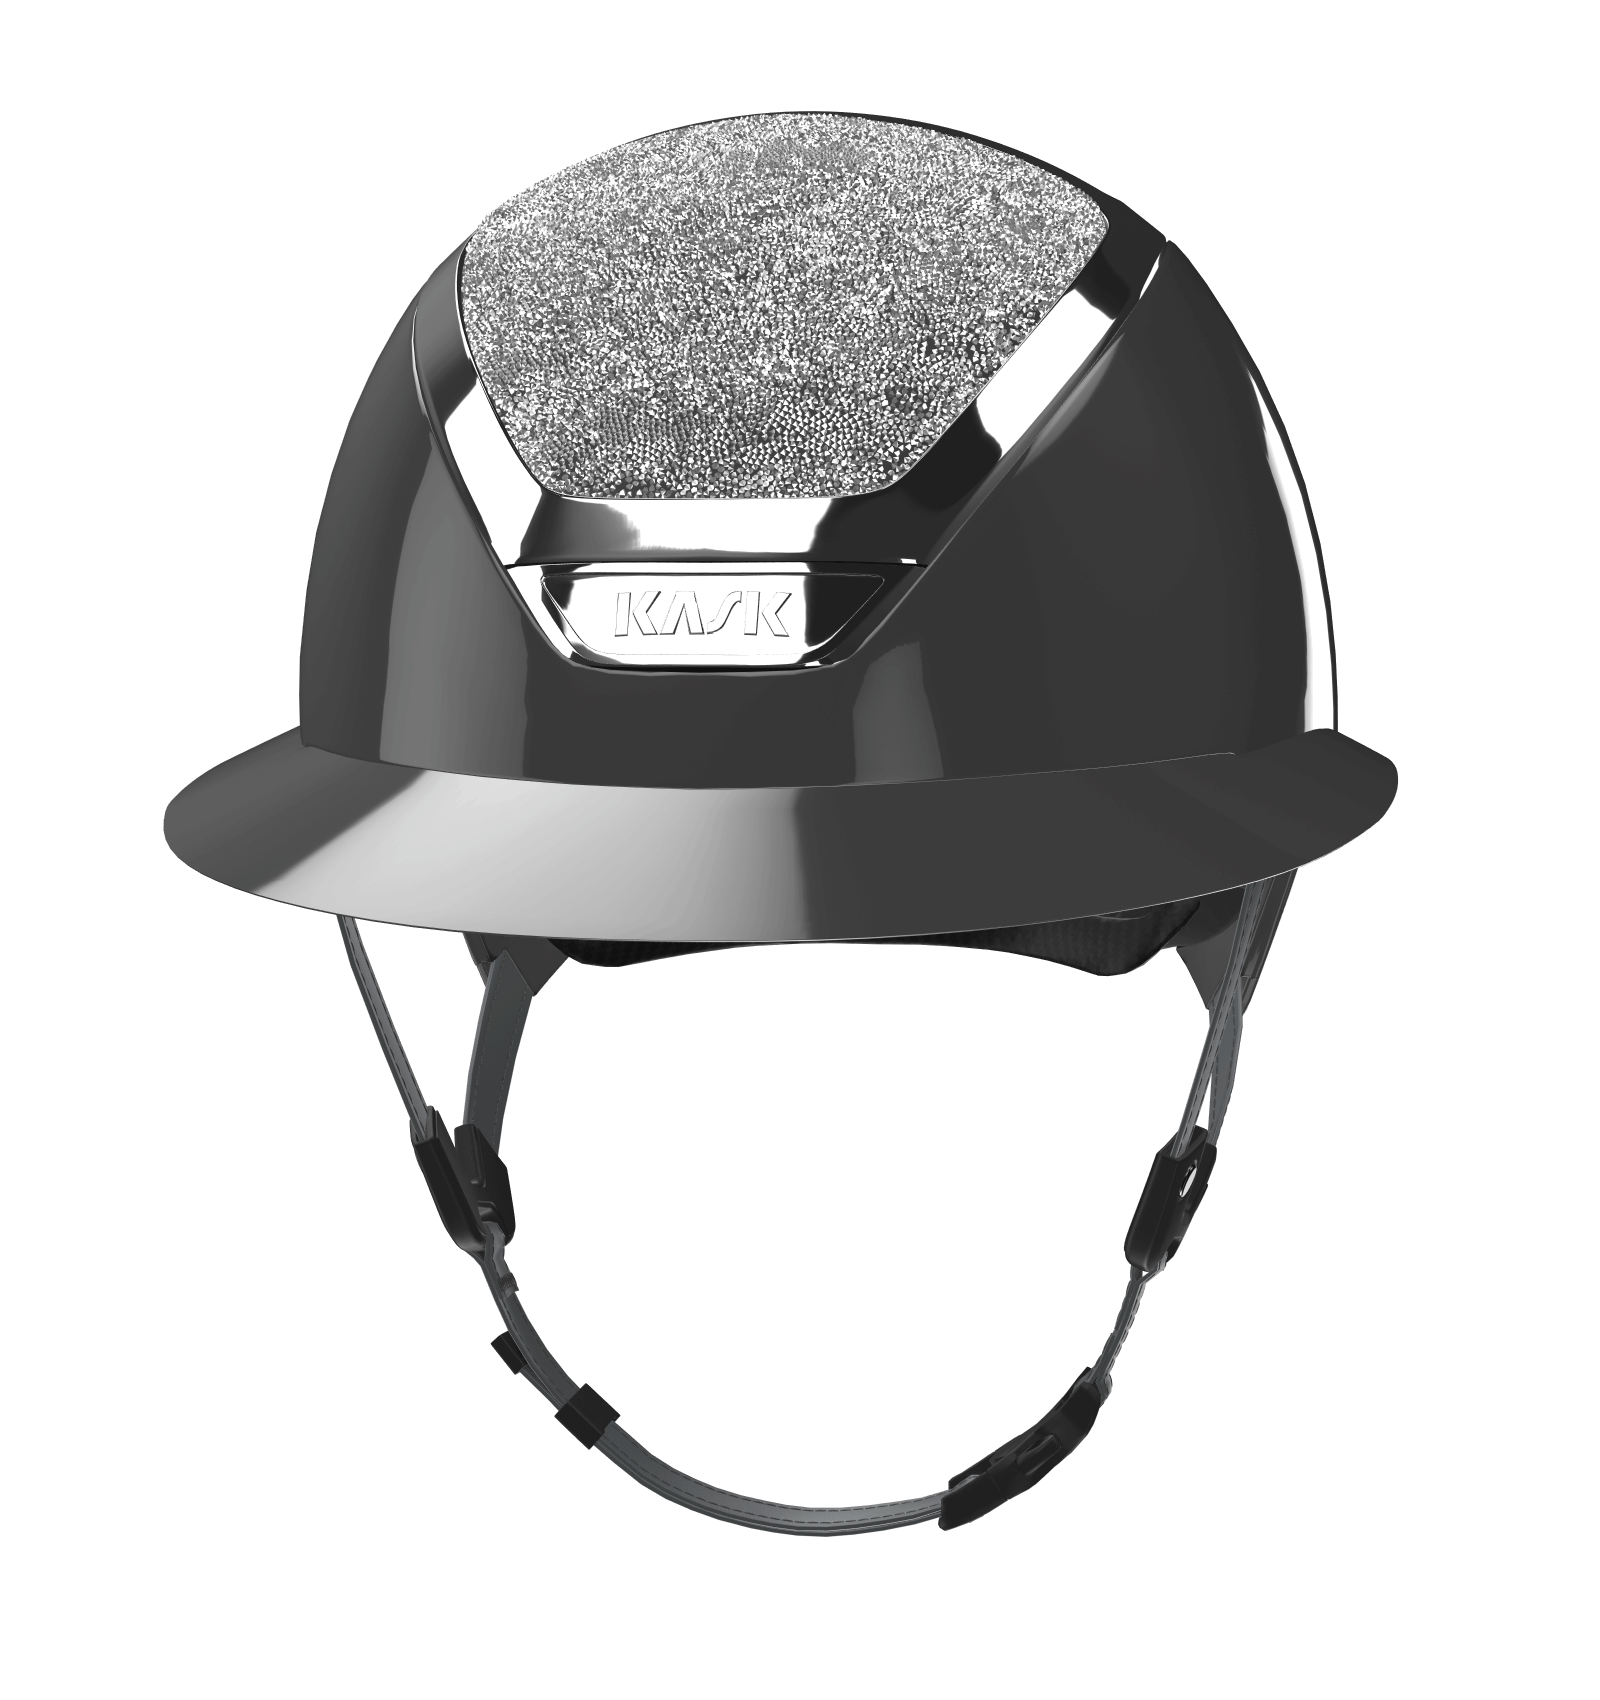 This riding helmet is an absolute must-have for all modern horse lovers. It is made of high-quality, robust plastic and decorated with beautiful, real Swarovski crystals. The helmet is in anthracite and has a chin strap in black.